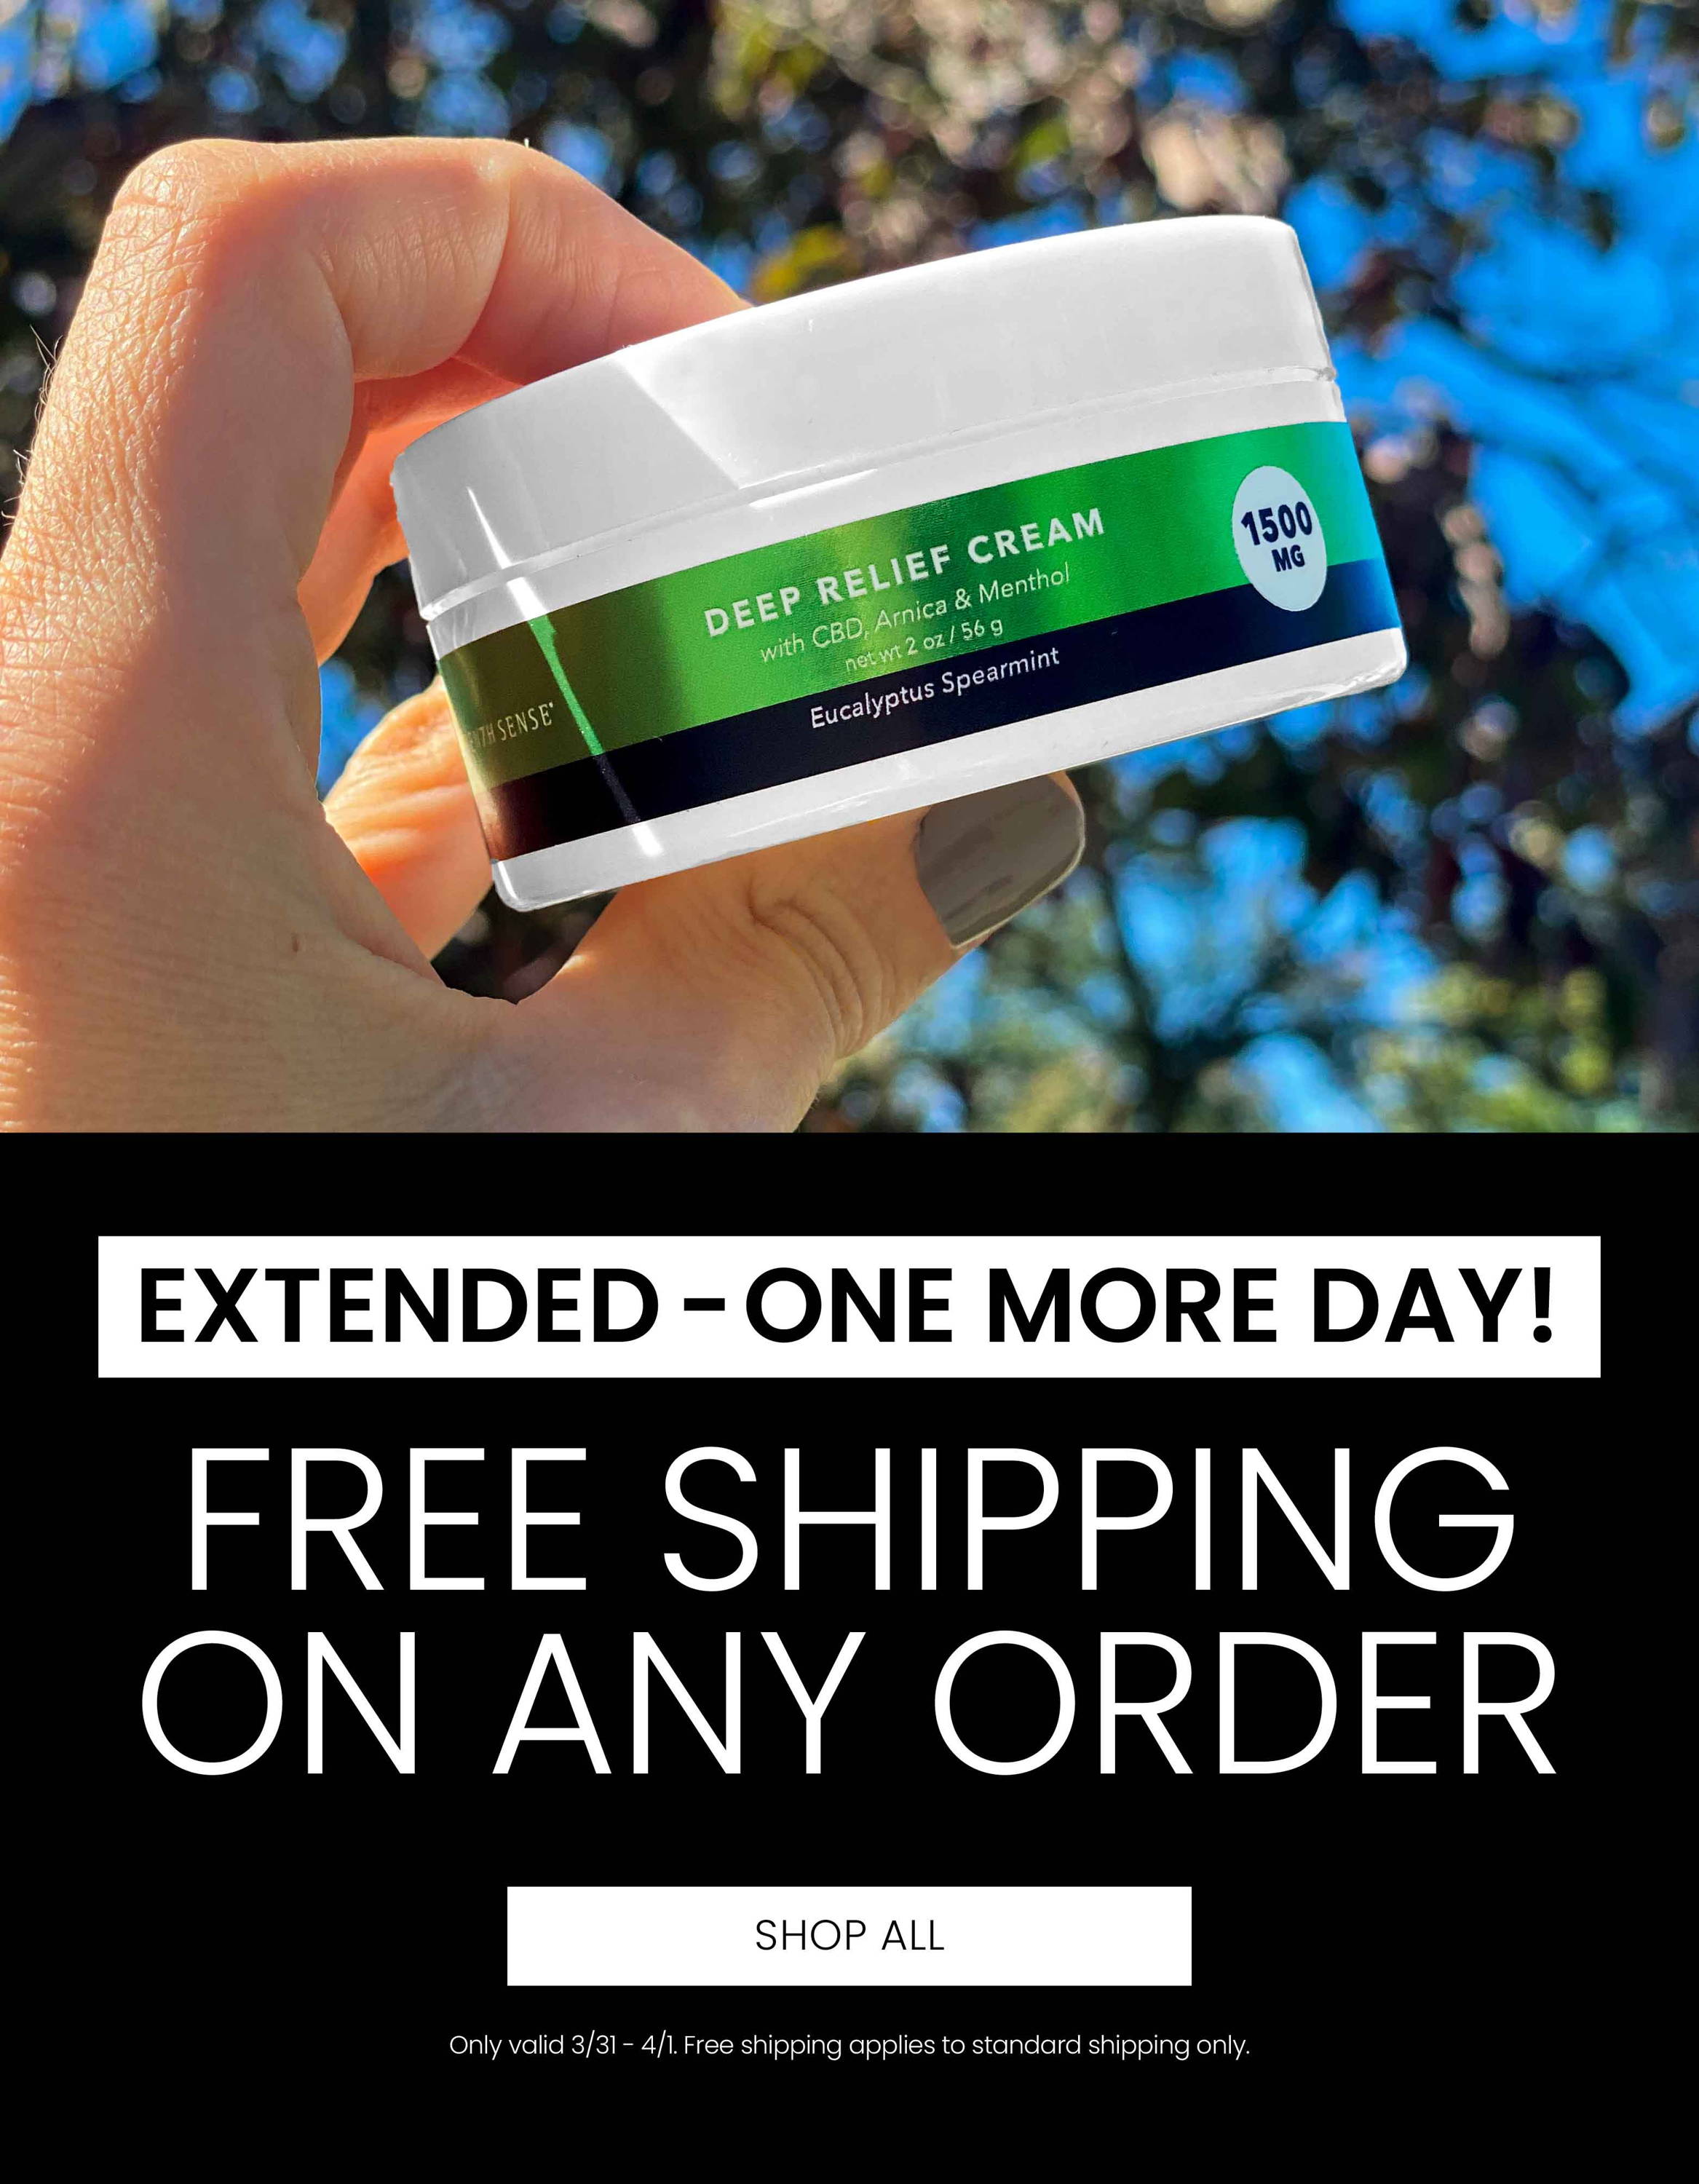 Extended - One More Day! Free Standard Shipping on Every Order.